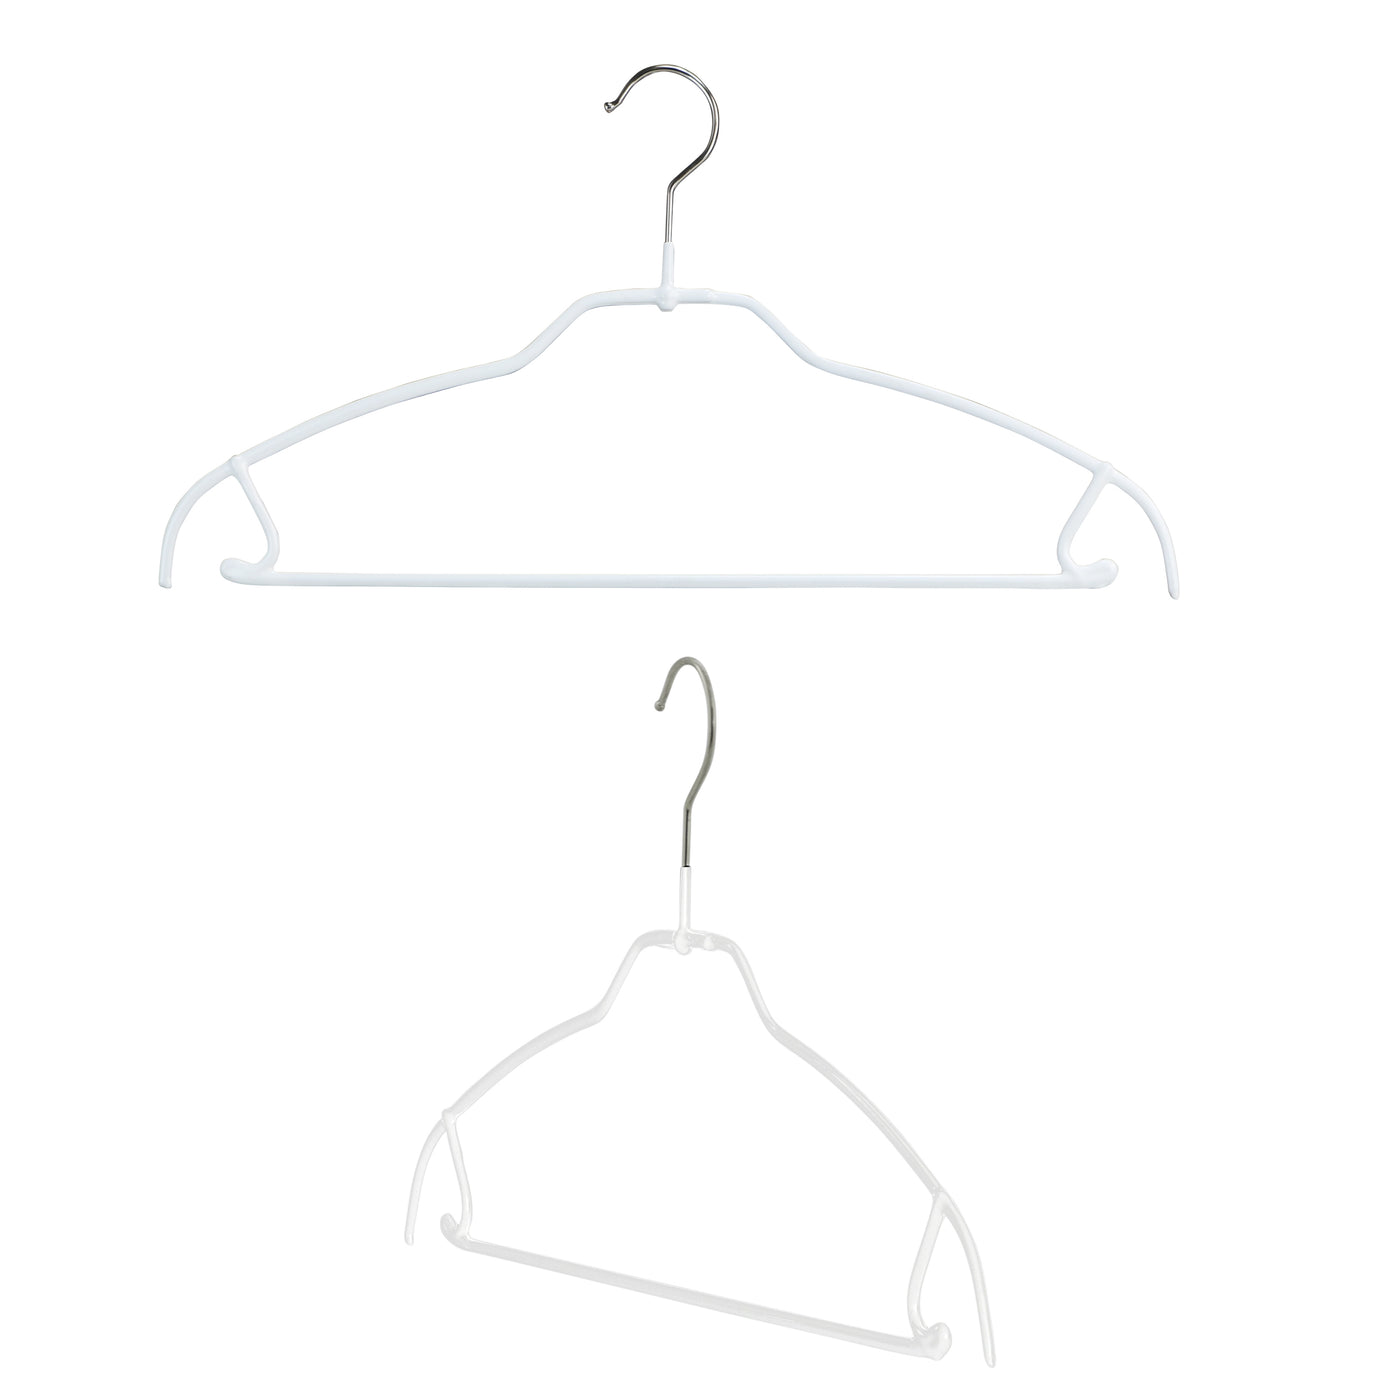 Mawa by Reston Lloyd Silhouette Series Non-Slip Space Saving Clothes Hanger, Style 45/F, Set of 10, Black